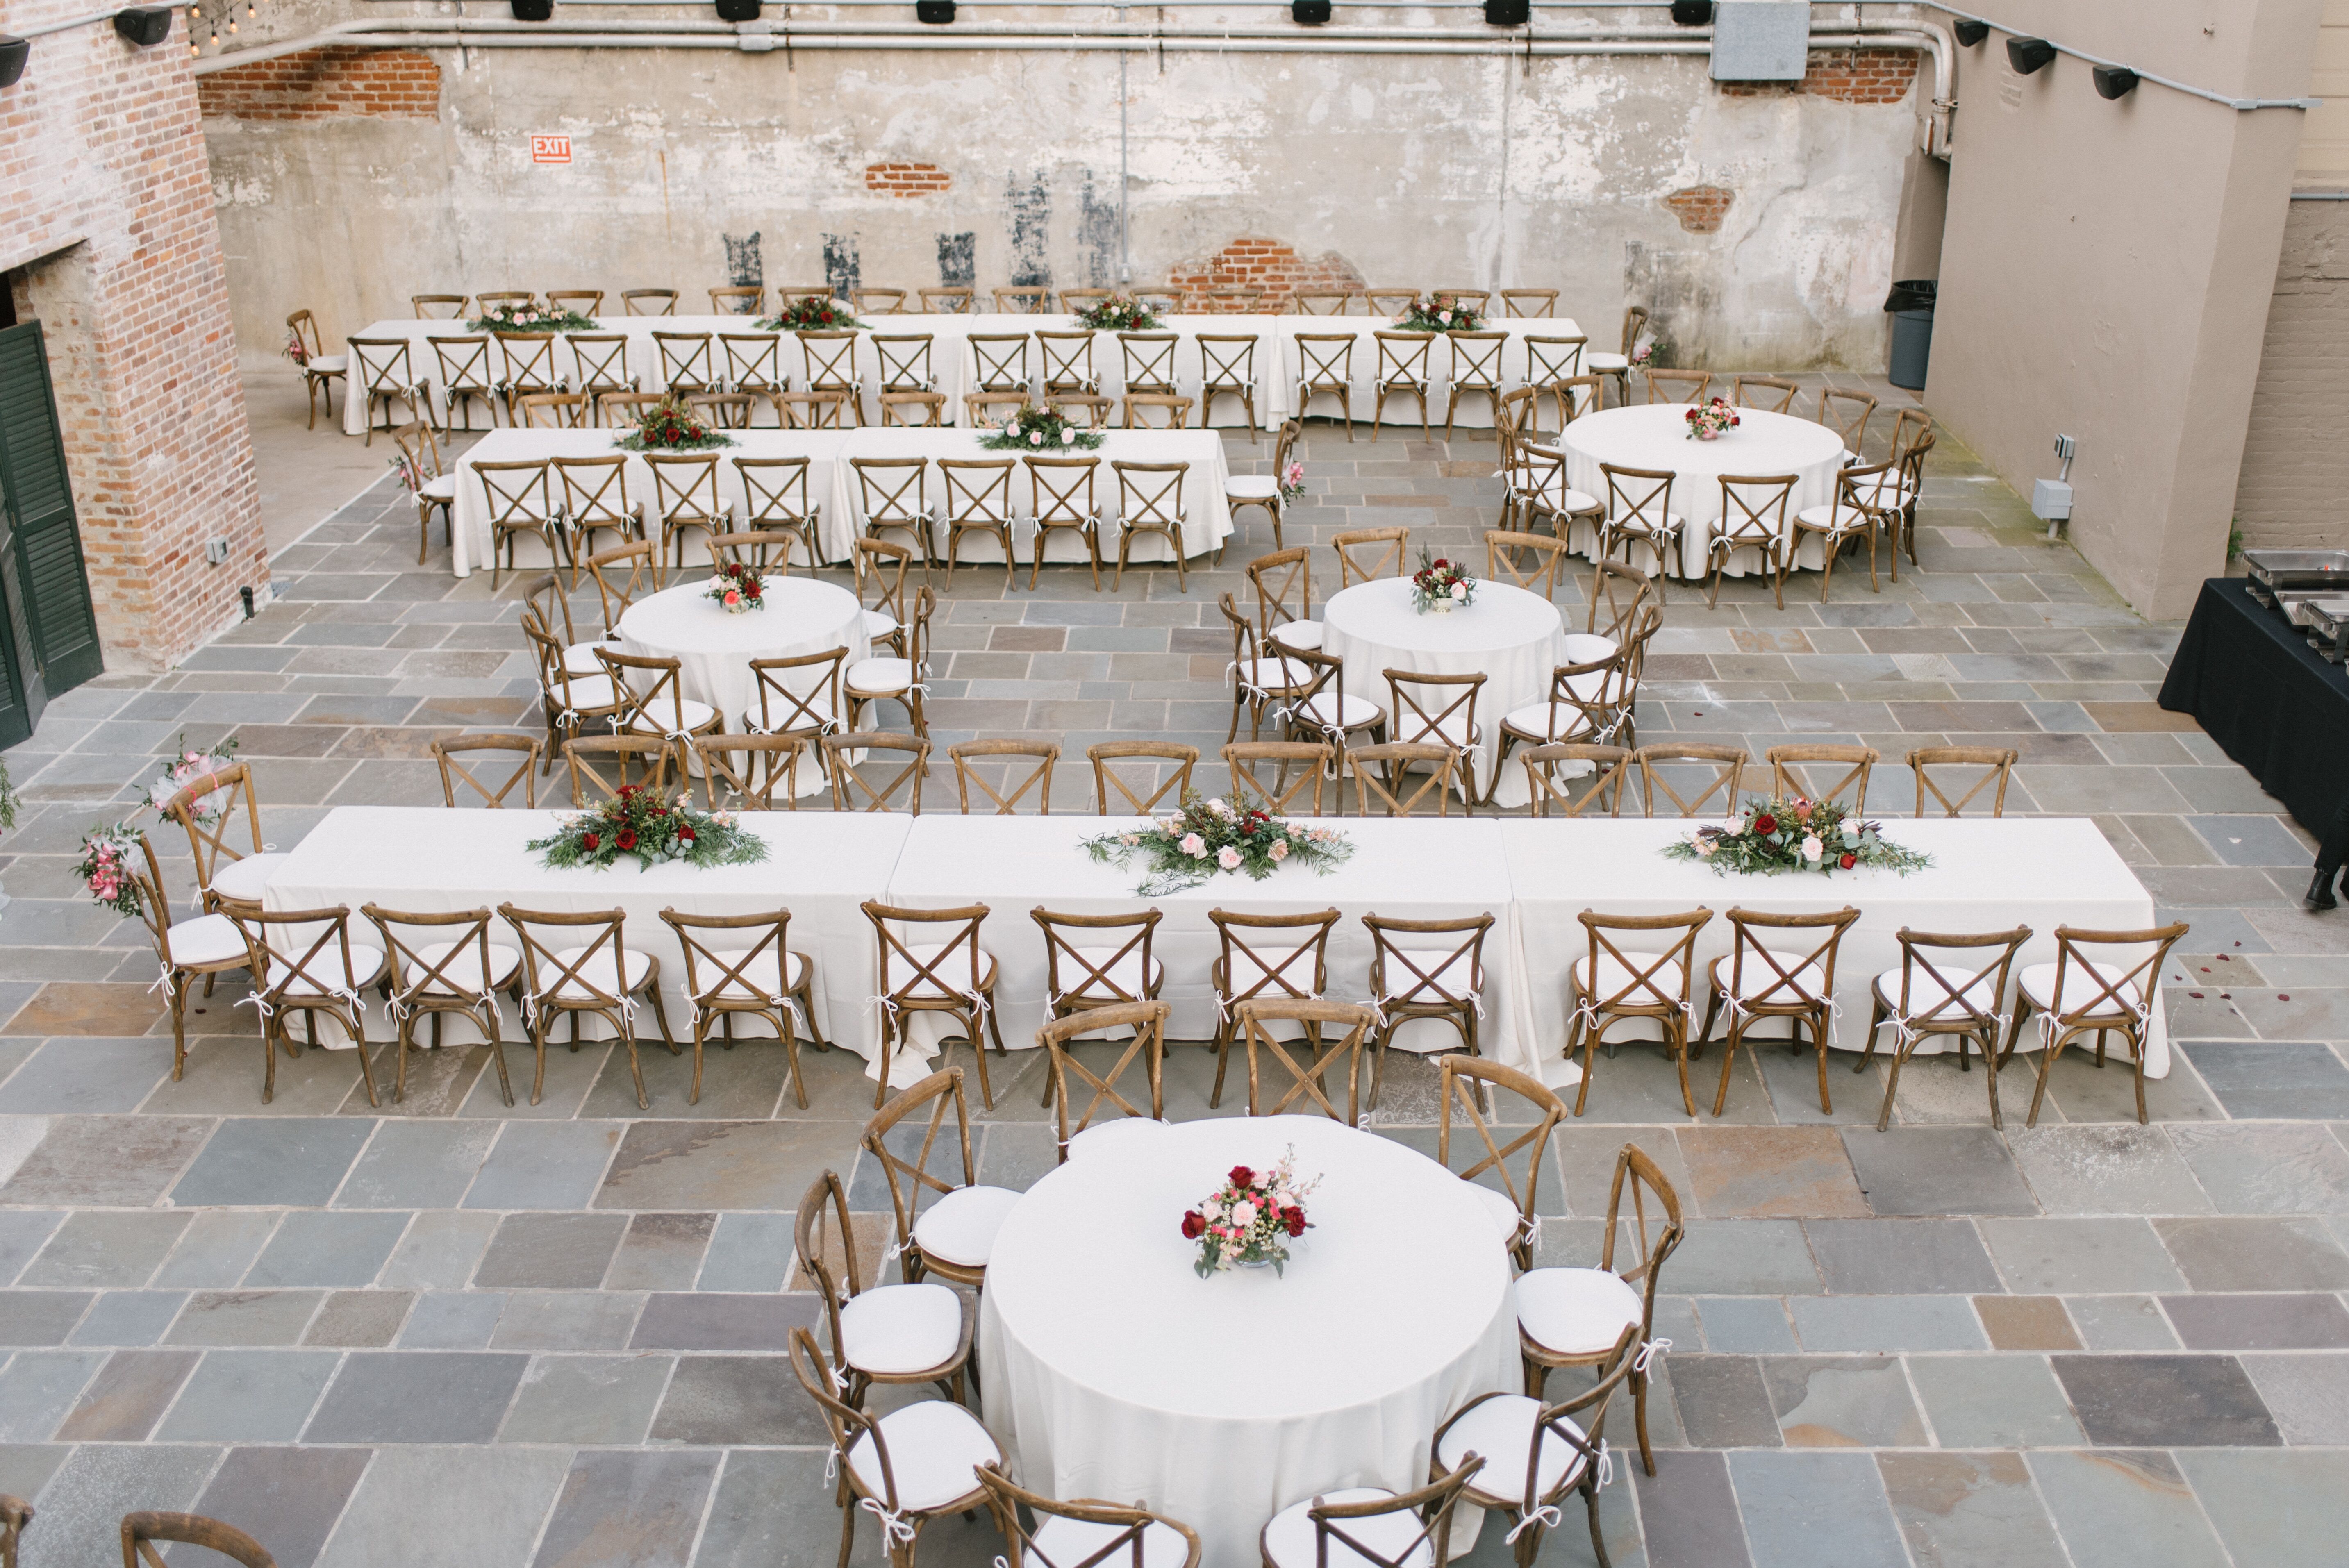 New Orleans Athletic Club | Reception Venues - The Knot